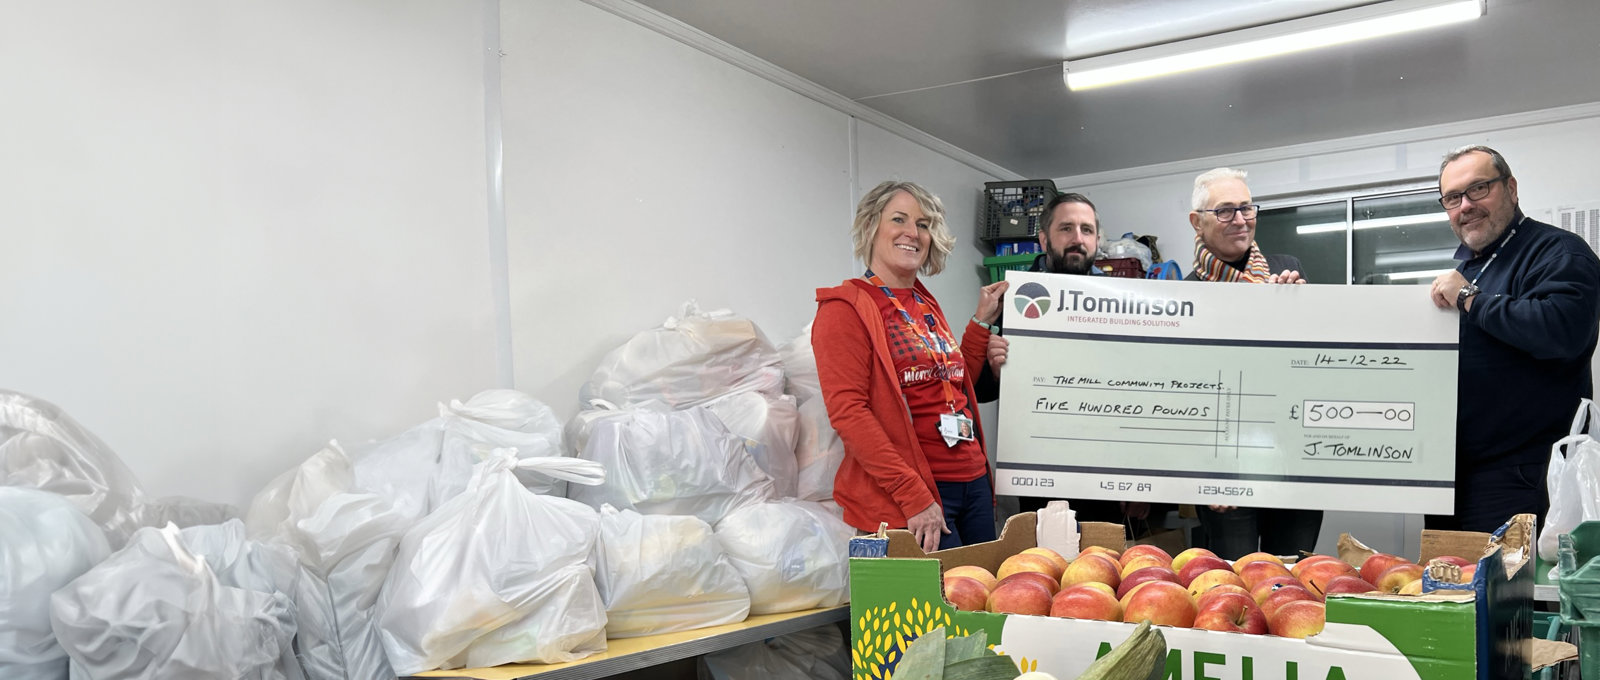 A photograph of four people holding a giant printed bank cheque and smiling to the camera. There are piles of fruit in the foreground and what look like food parcels behind them